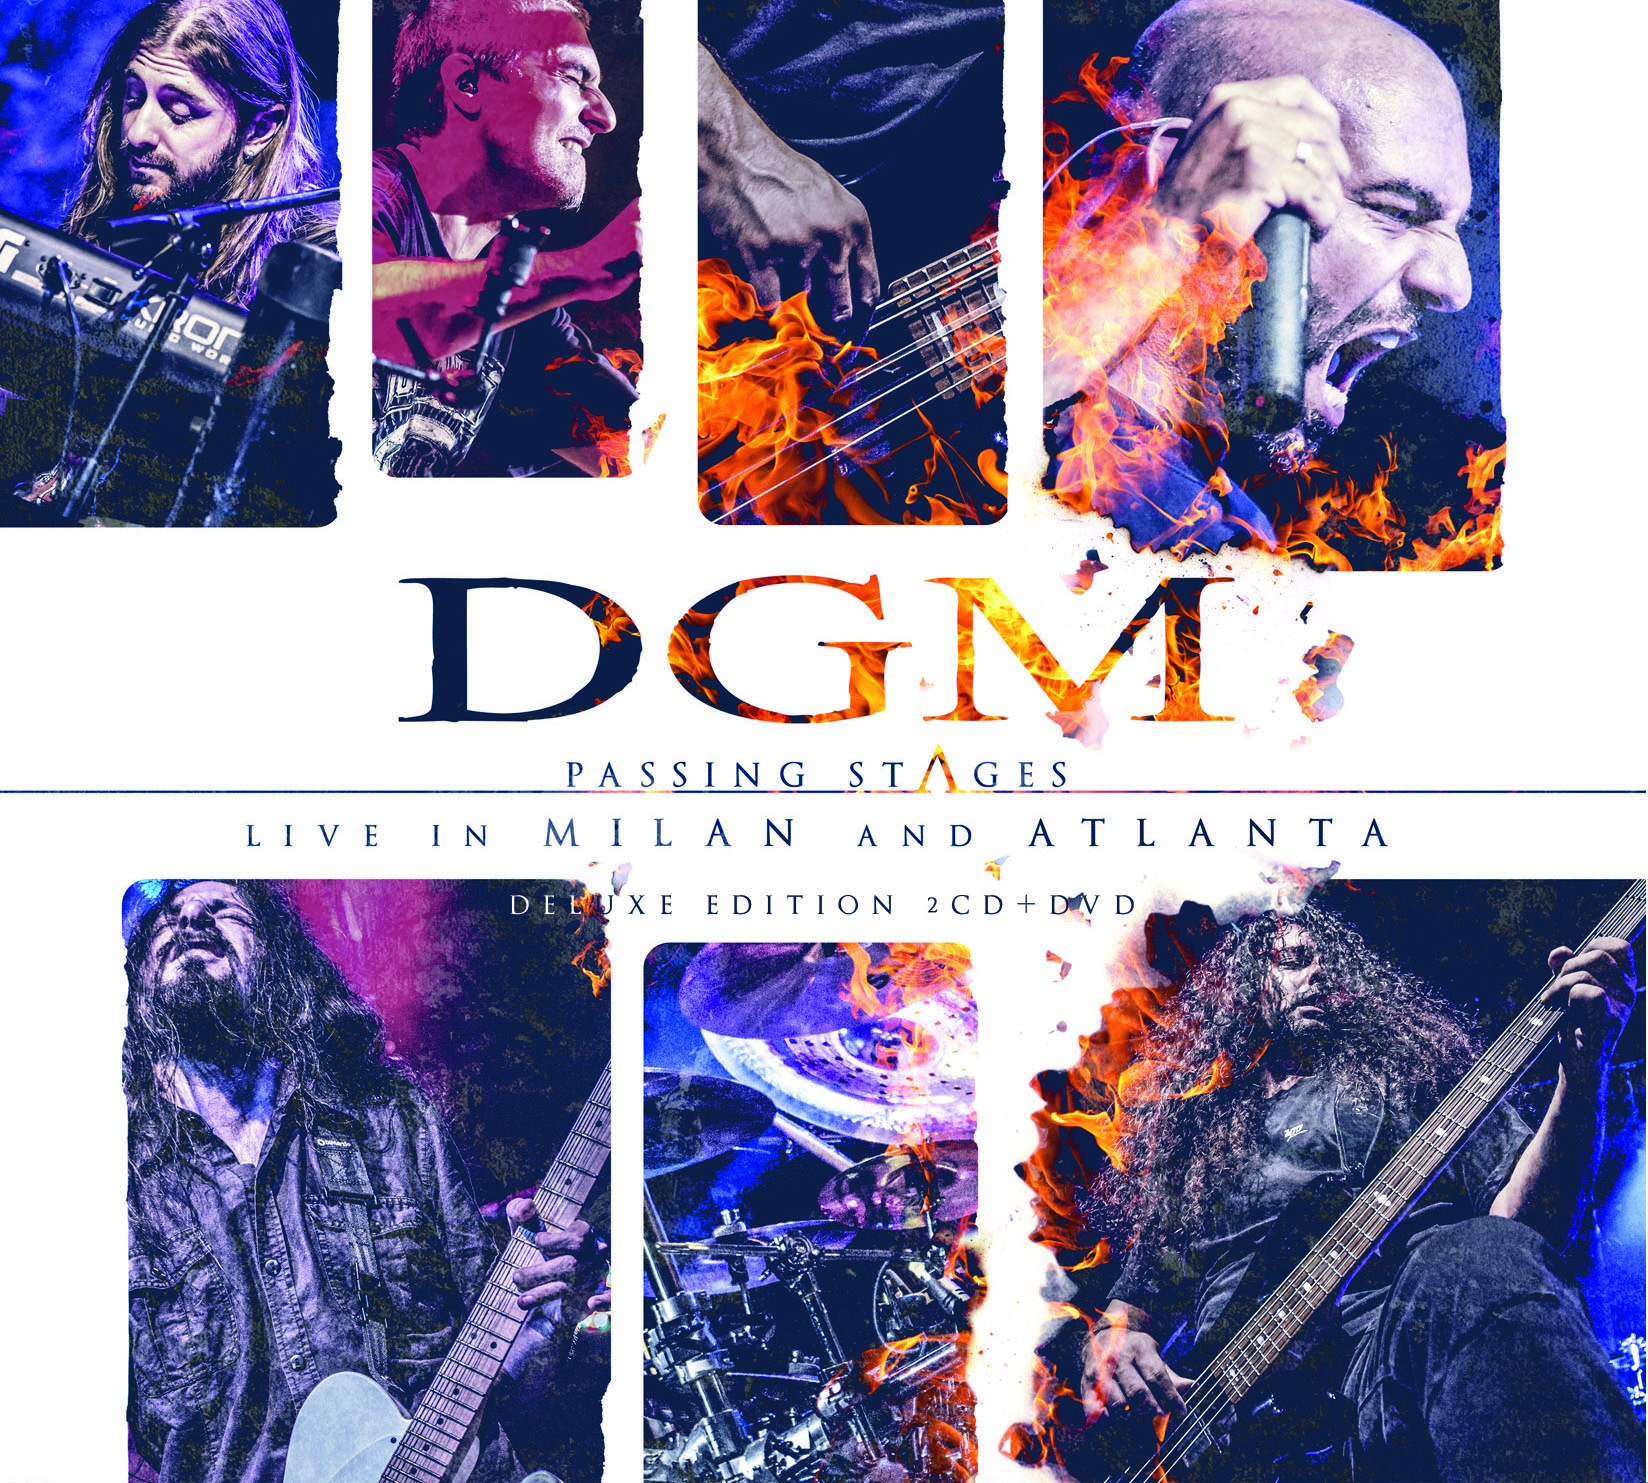 DGM - Passing Stages – Live in Milan and Atlanta (Deluxe Edition)